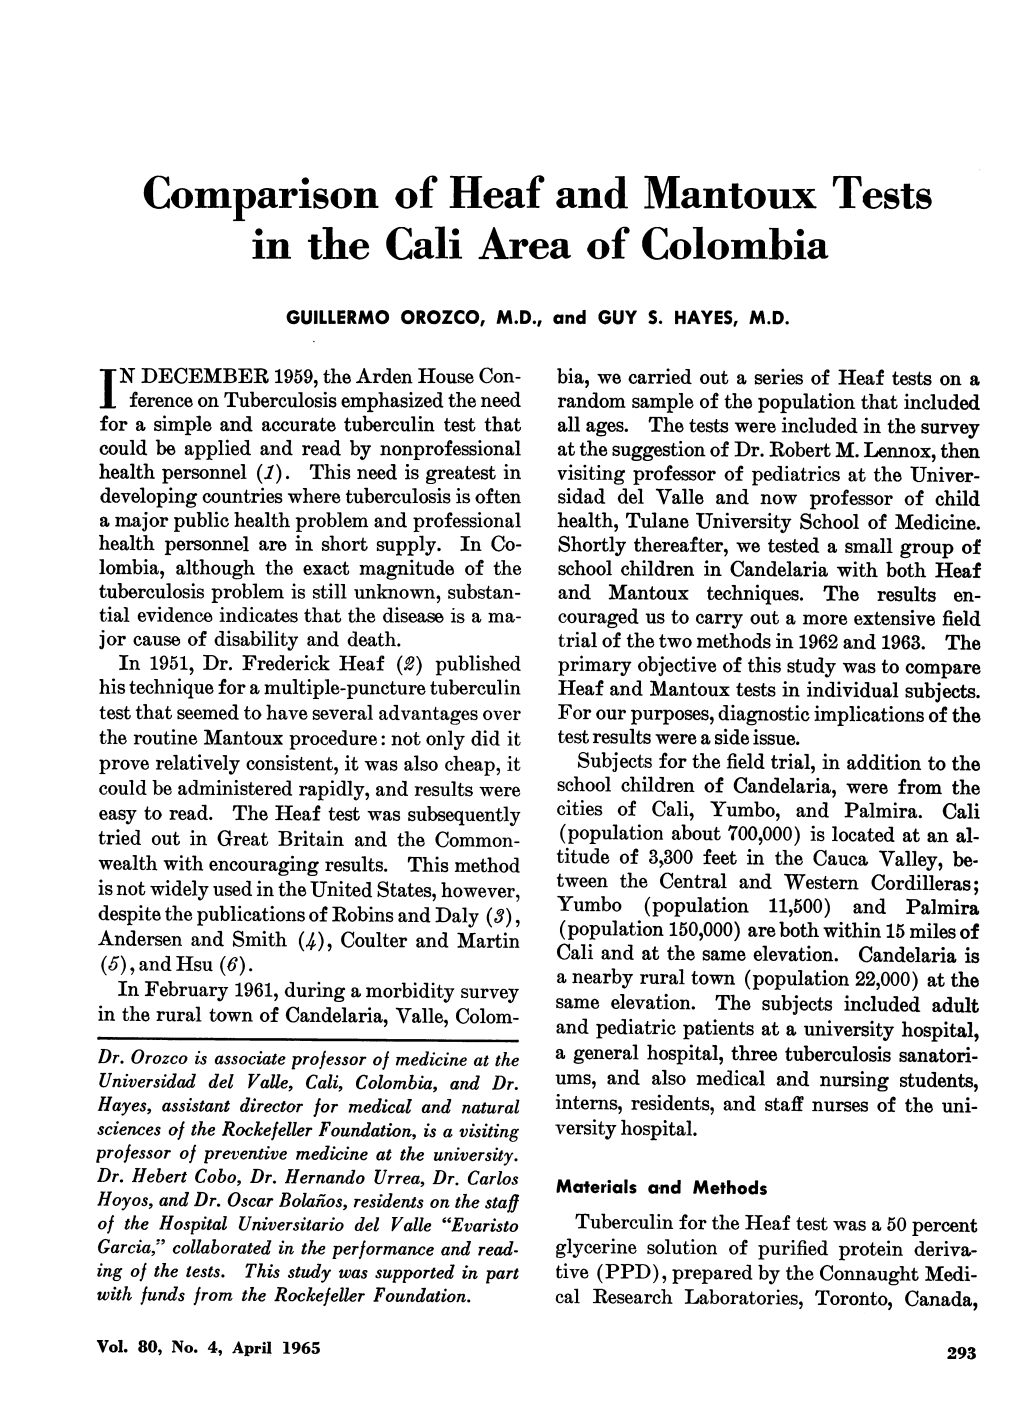 Comparison of Heaf and Mantoux Tests in the Cali Area of Colombia